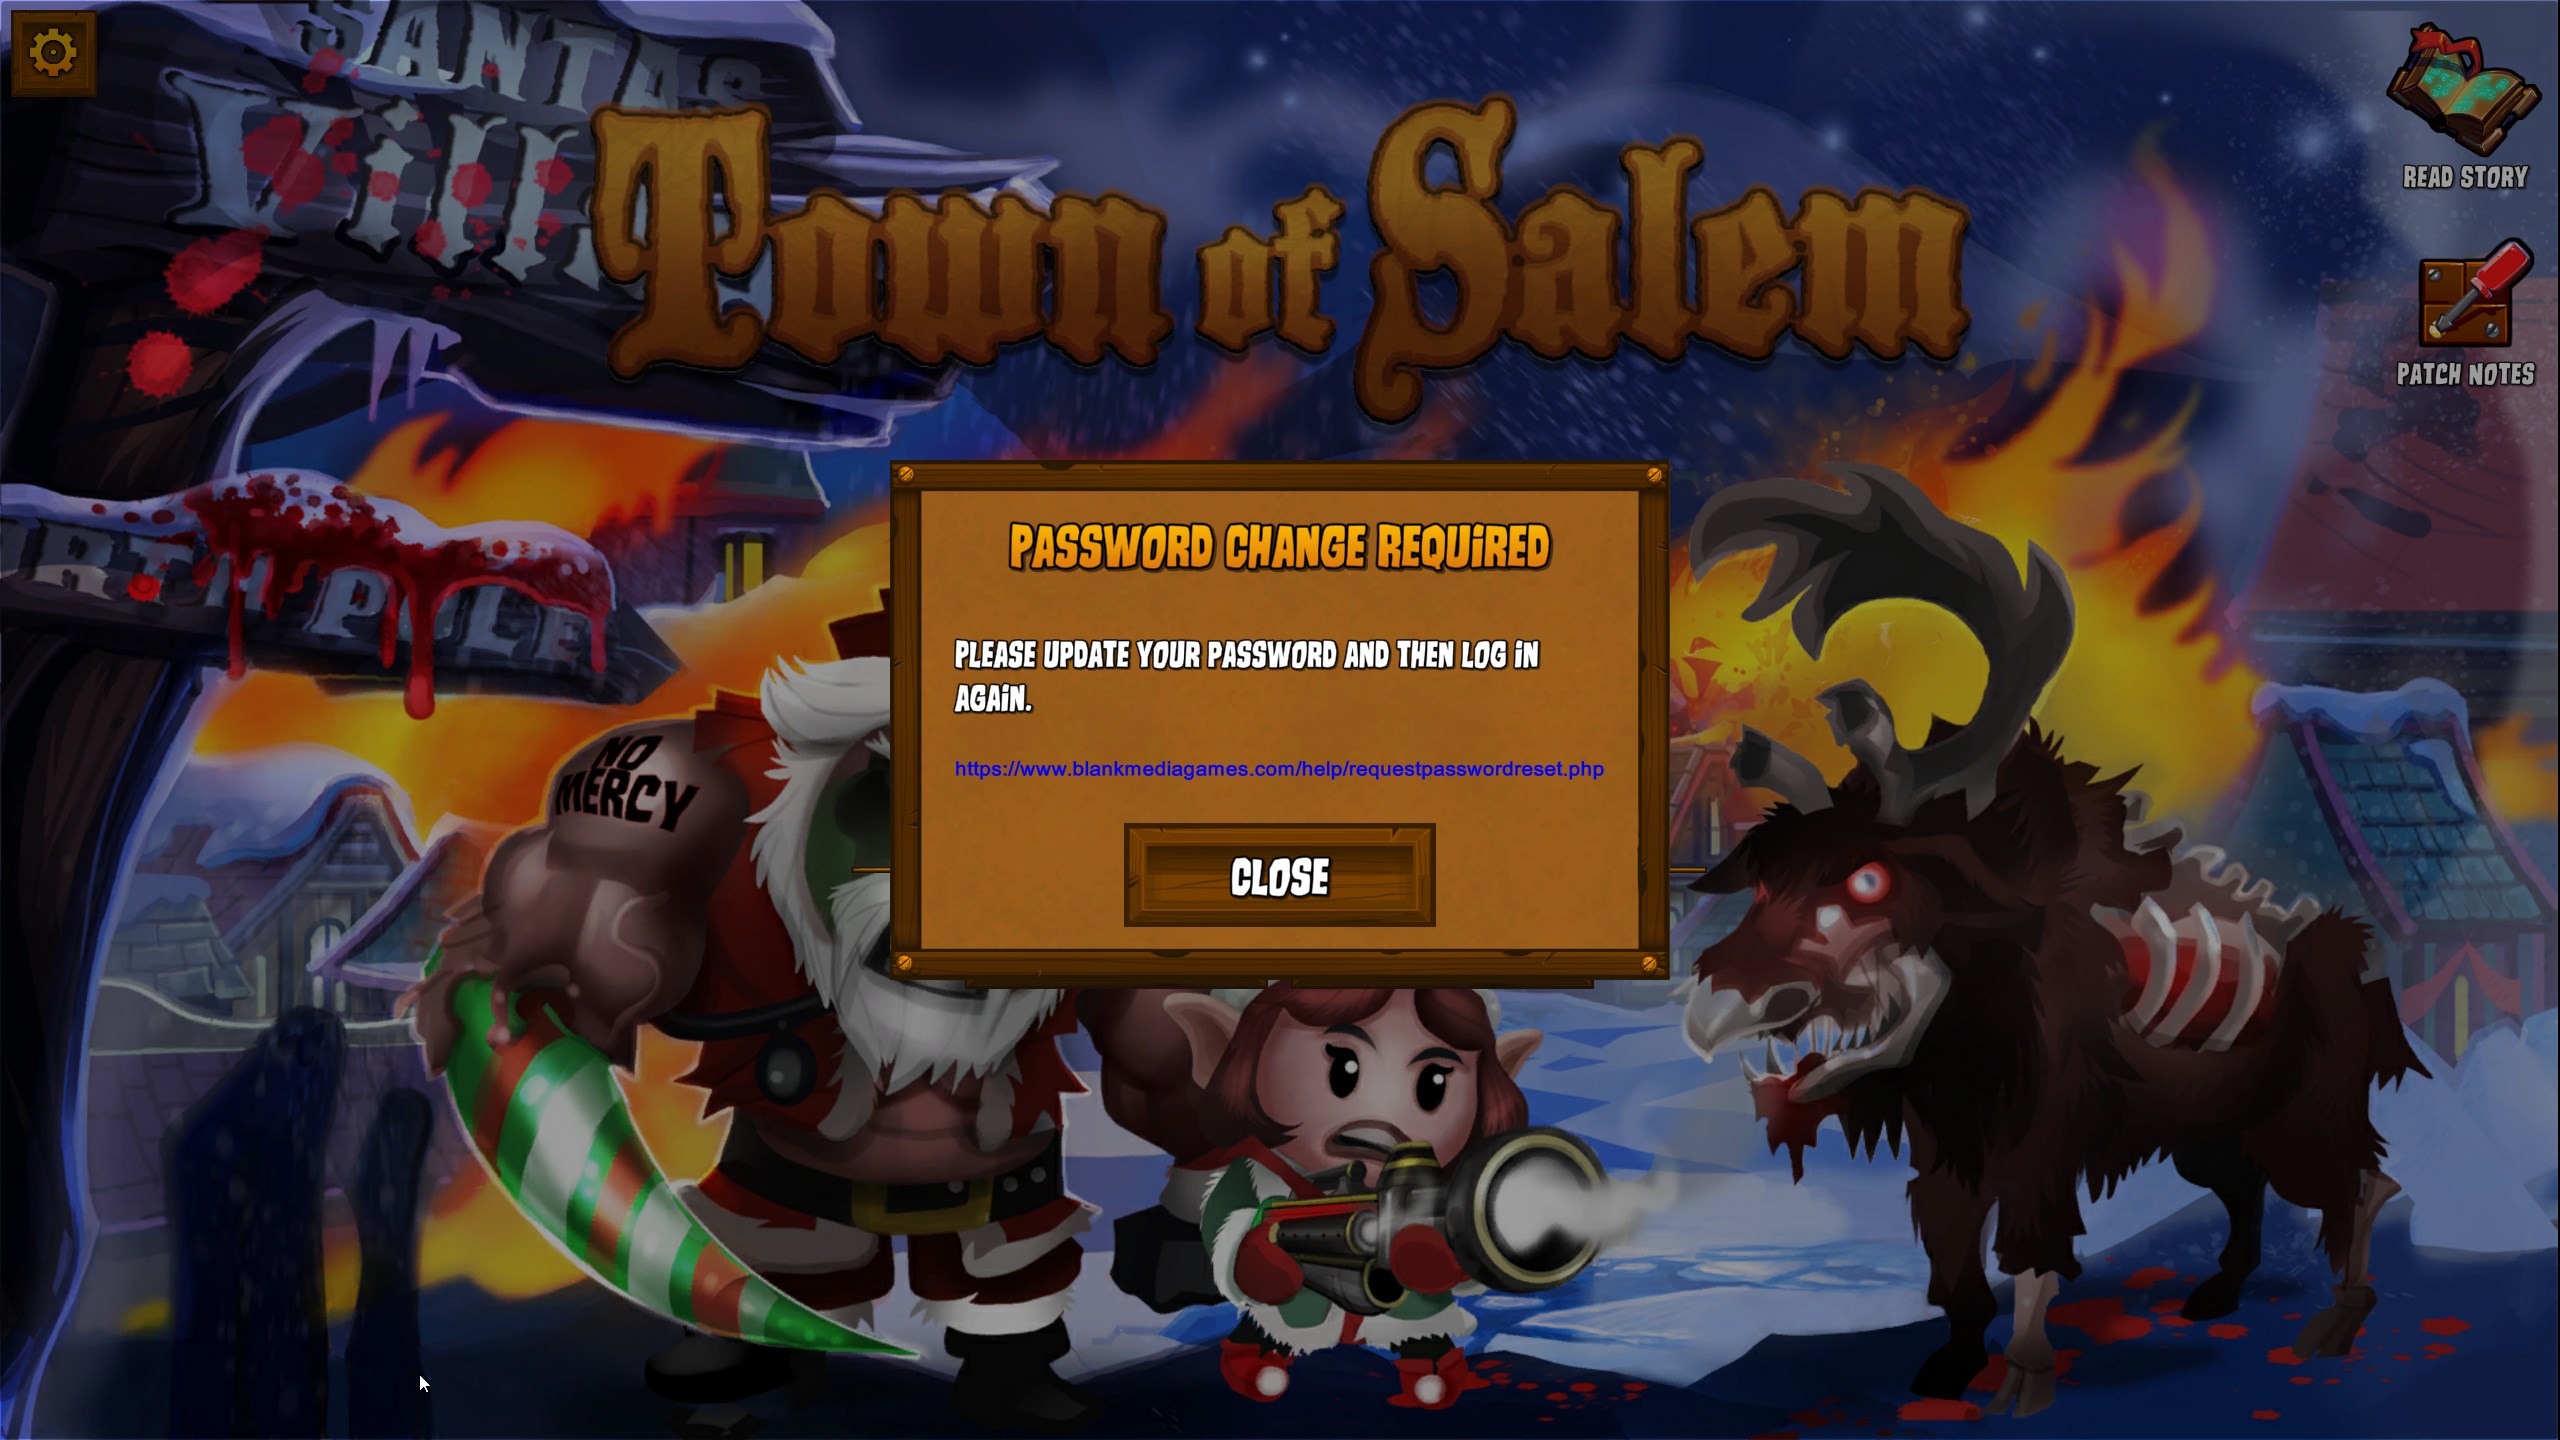 27% of Passwords From Town of Salem Breach Already Cracked